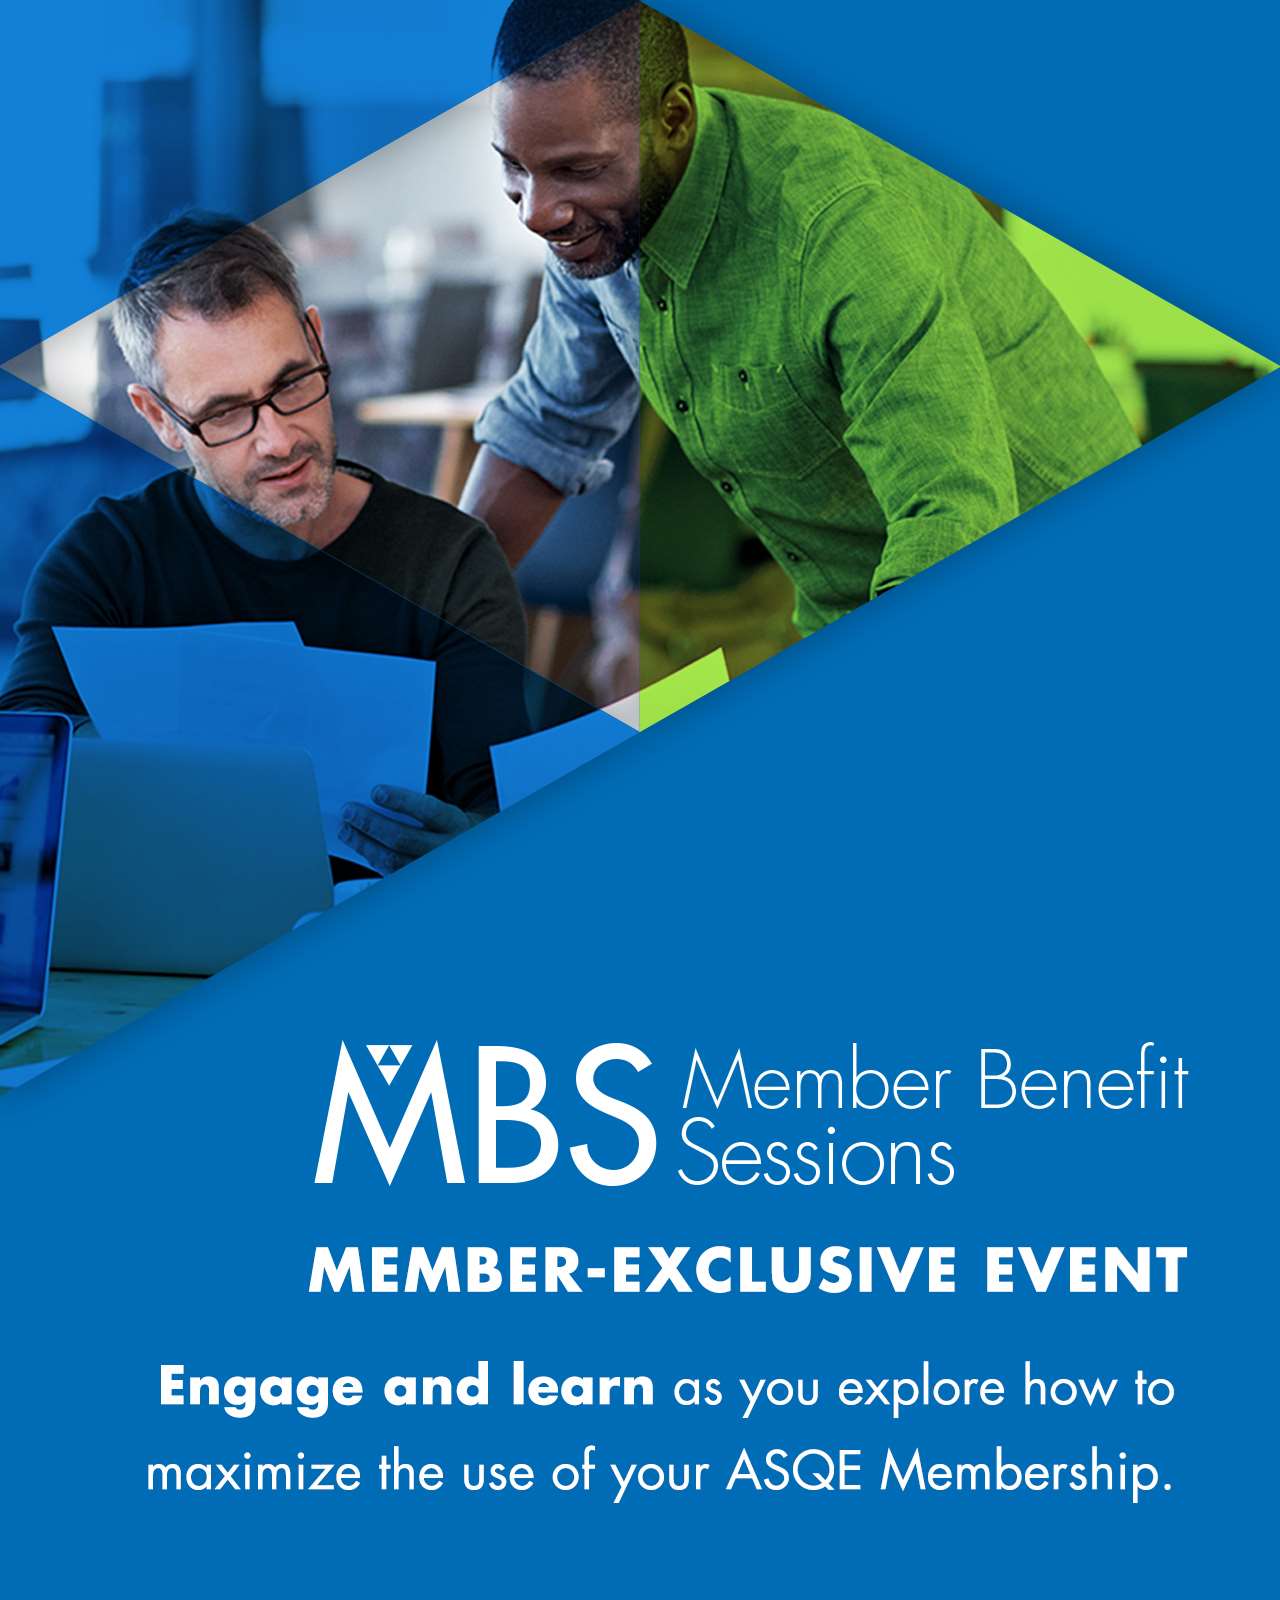 Two men looking over papers in a business setting with blue gradient on image and text for "Member Benefit Sessions" Member-Exclusive Event.